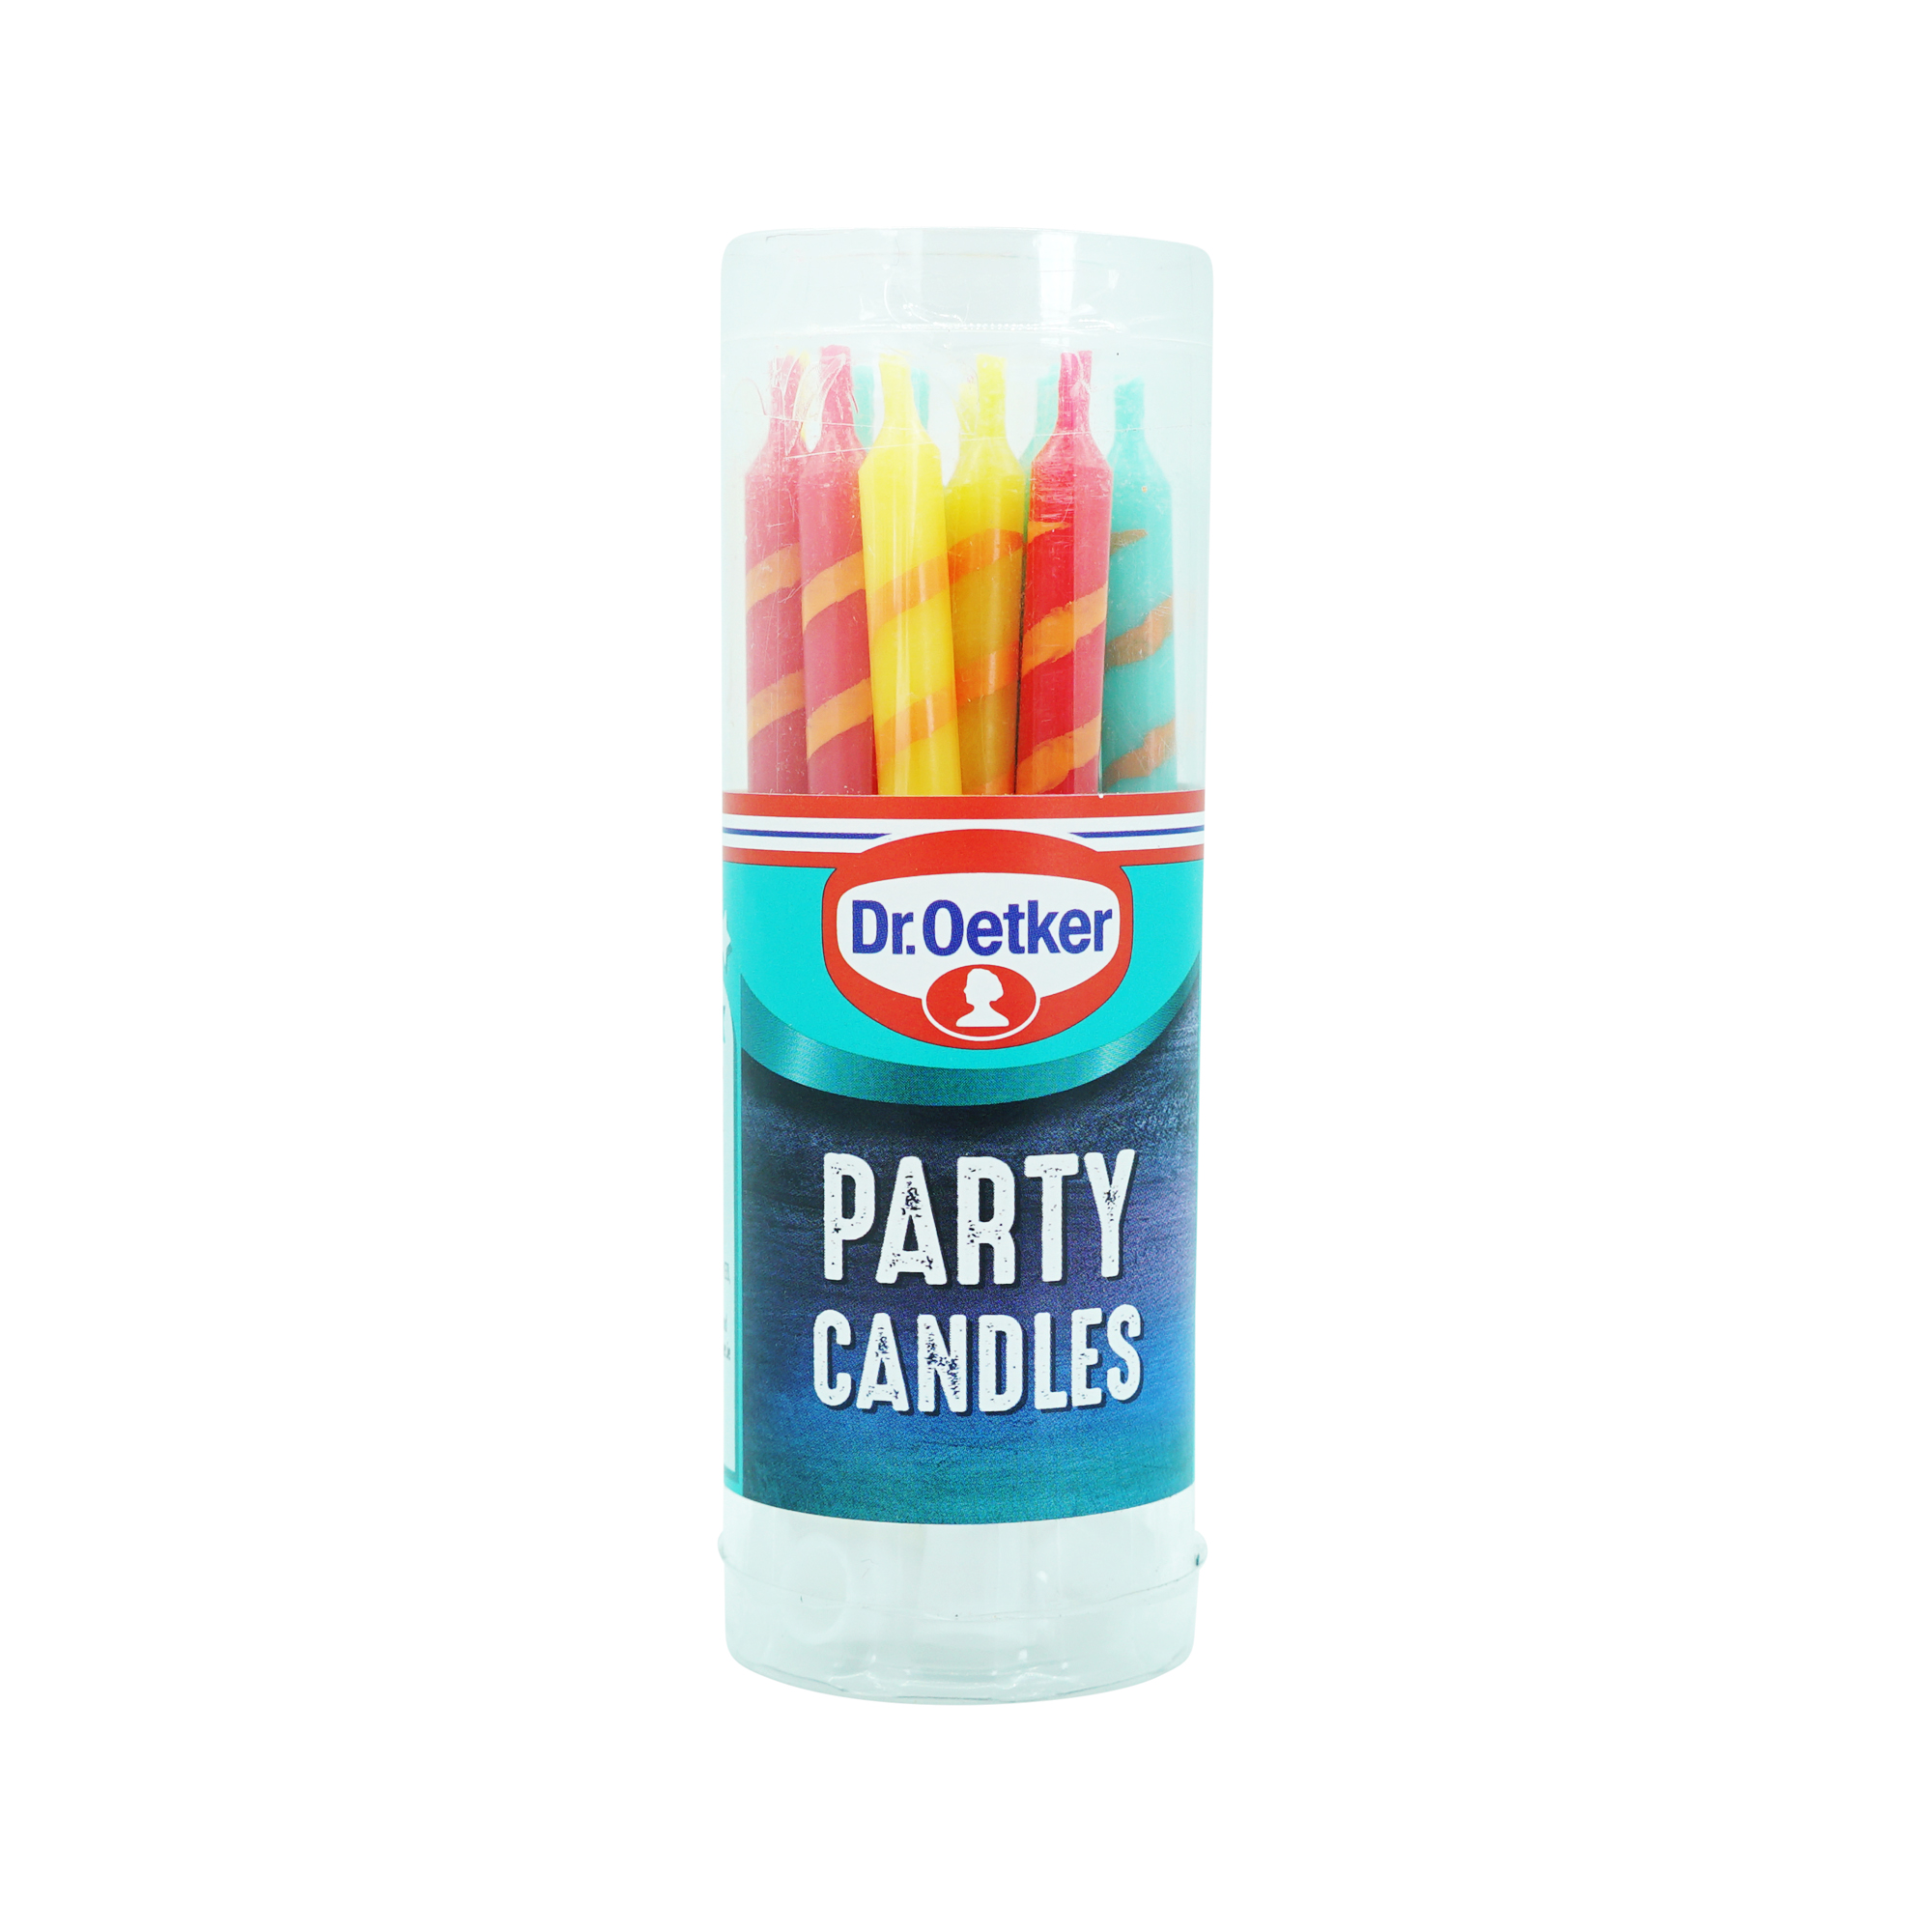 Dr.Oetker Party Candles (30g)